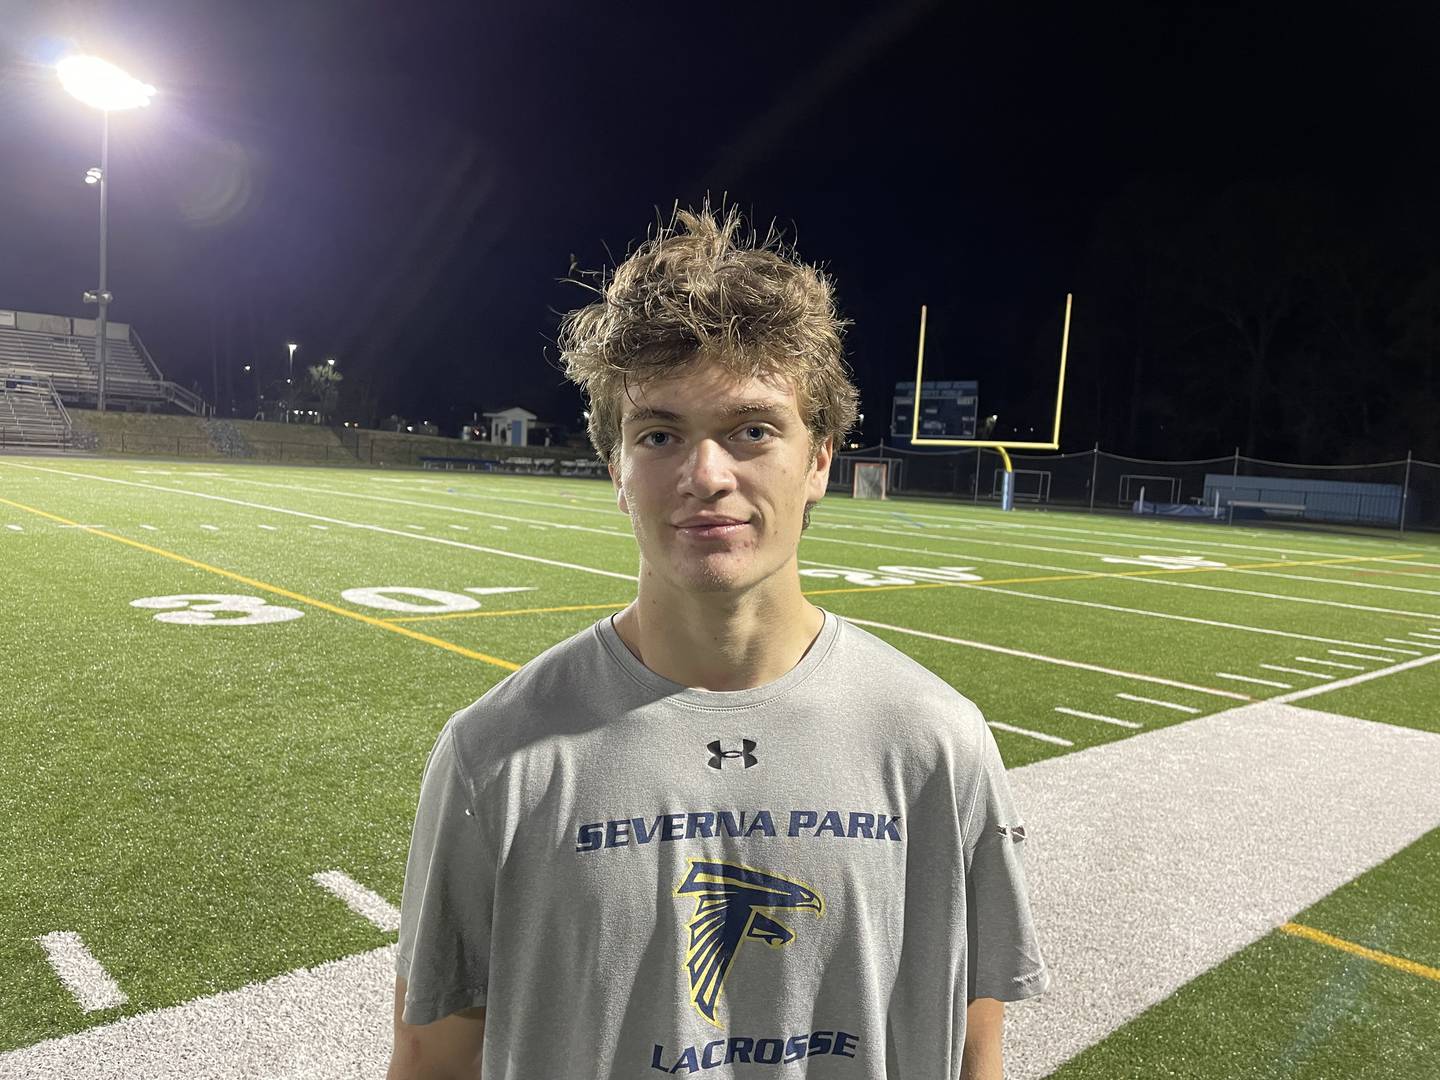 John Burkhardt helped keep Severna Park's boys lacrosse team undefeated Friday evening. The junior scored 5 goals as the No. 9 Falcons defeated South River, 11-8, in a battle of undefeated Anne Arundel County in Edgewater.